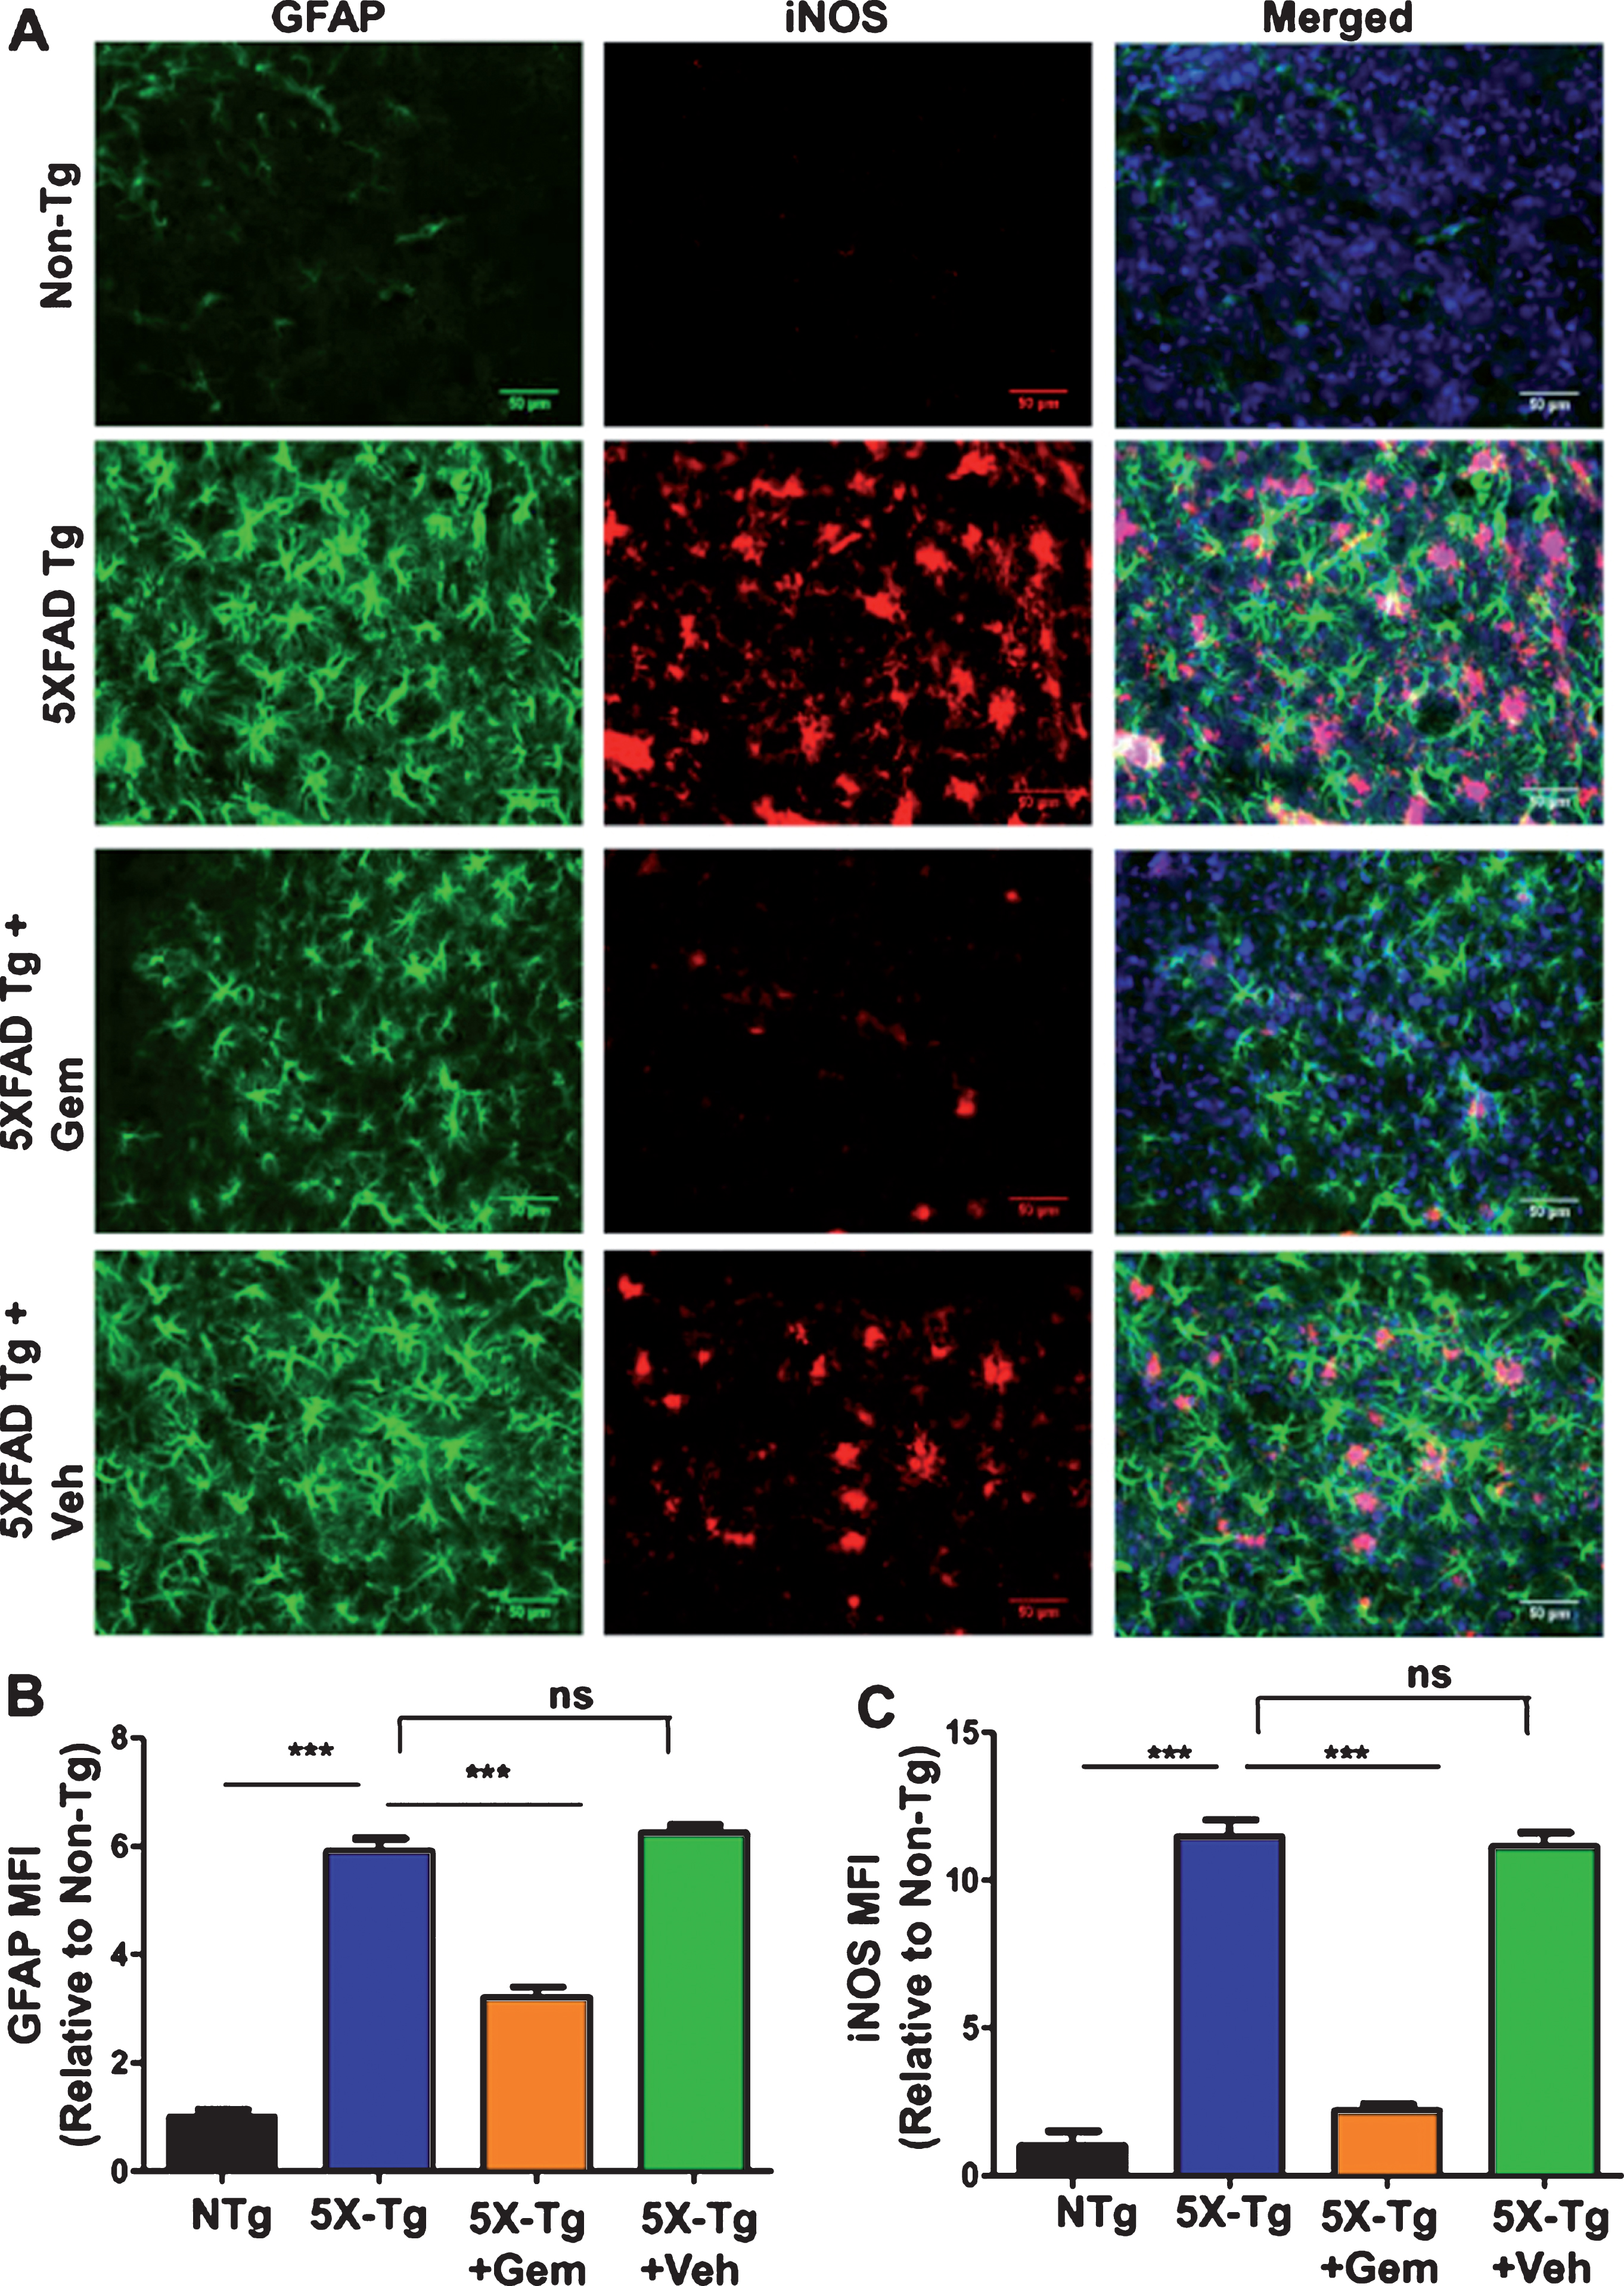 Oral gemfibrozil decreases astroglial activation in the cortex of 5XFAD mice. Six-month-old 5XFAD mice (n = 6) were treated with gemfibrozil (7.5 mg/kg/day) or vehicle (0.1% methylcellulose) for 1 month followed by double-labeling of cortical sections for GFAP and iNOS (A). Scale bar = 50μm. Mean fluorescence intensity (MFI) of GFAP (B) and iNOS (C) was calculated from two sections (one image/section) of each of six mice per group. All data are represented as fold change (mean±SEM) with respect to the non-transgenic. One way ANOVA followed by Tukey’s multiple comparison test was used for statistical analysis;  ***p <  0.001; ns, not significant.